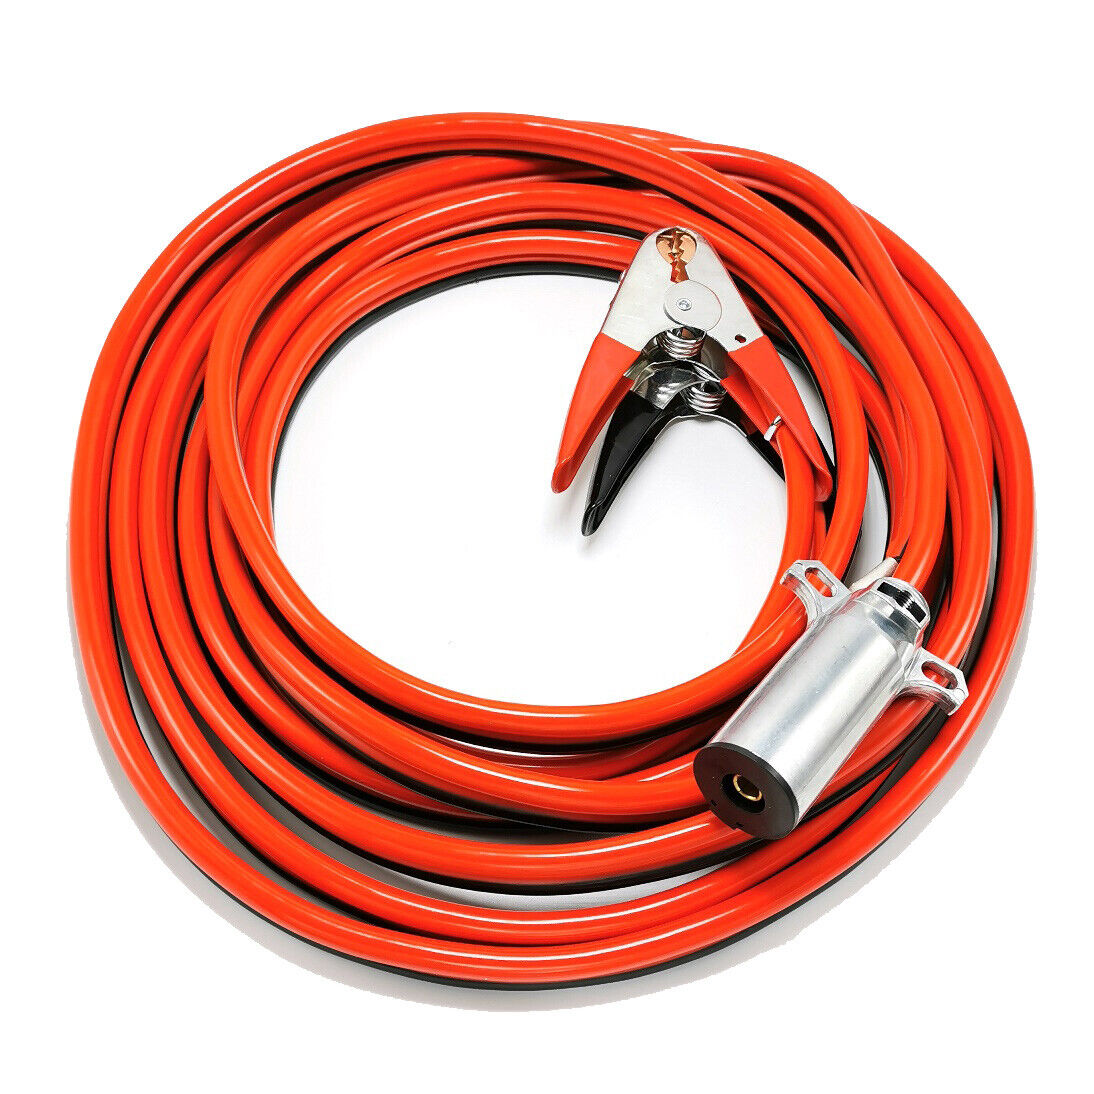 Aircraft Jumper Cable with Round 1-Pin Plug Piper Style Plug, 1 Gauge 25 Feet